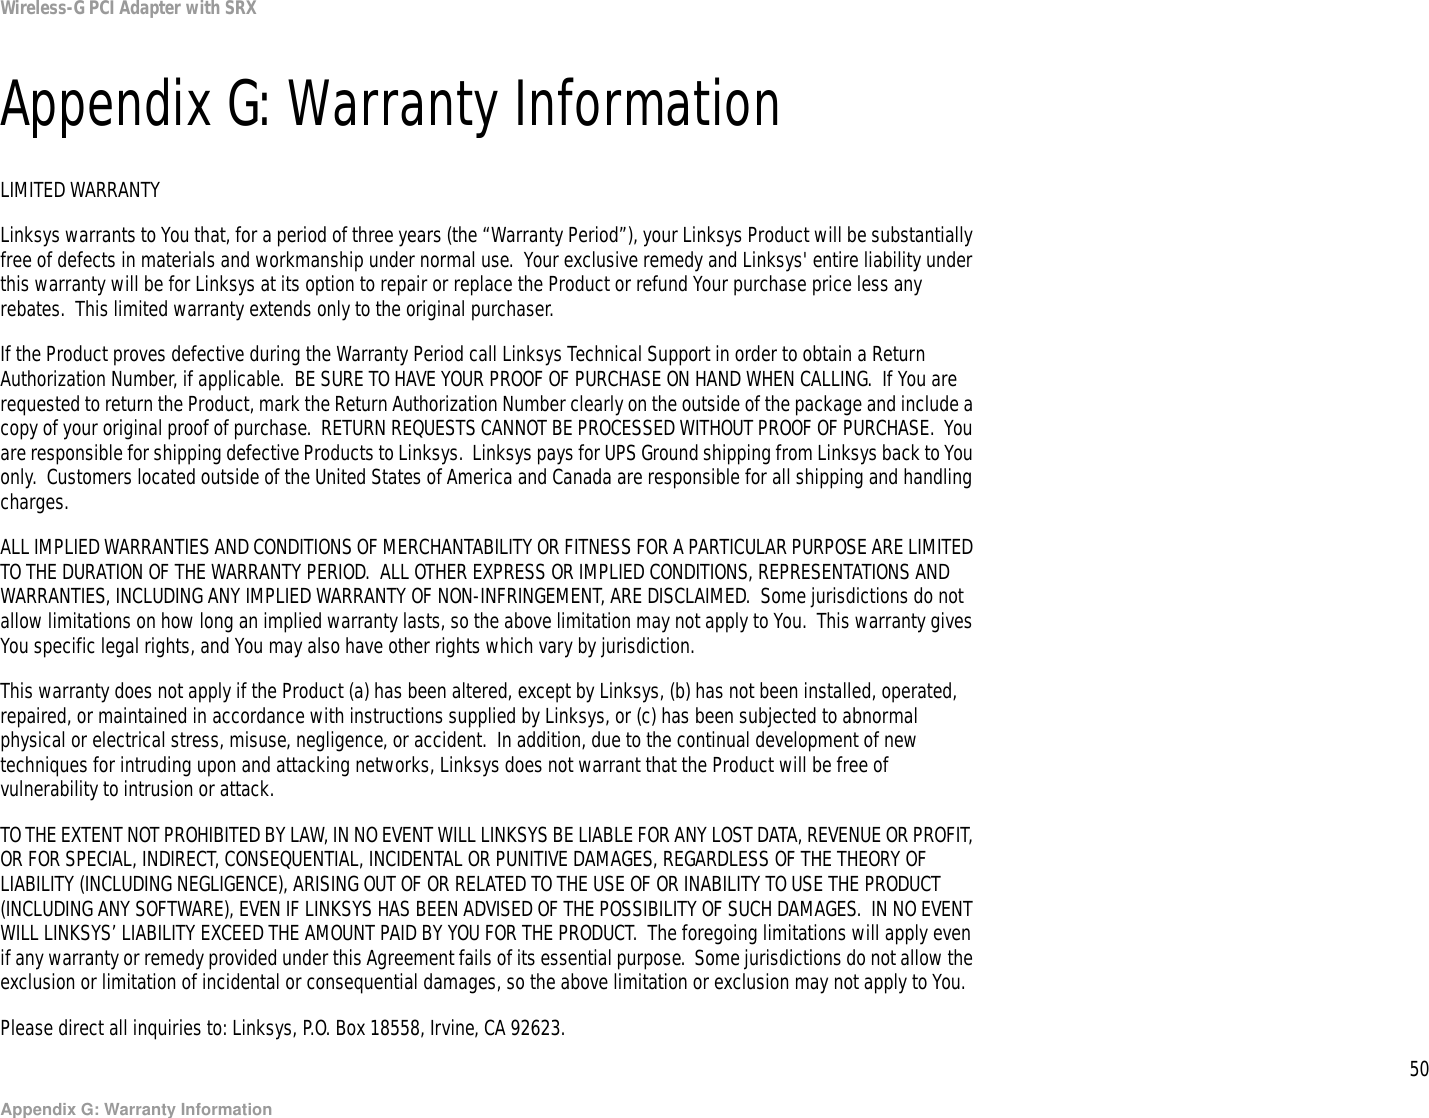 50Appendix G: Warranty InformationWireless-G PCI Adapter with SRXAppendix G: Warranty InformationLIMITED WARRANTYLinksys warrants to You that, for a period of three years (the “Warranty Period”), your Linksys Product will be substantially free of defects in materials and workmanship under normal use.  Your exclusive remedy and Linksys&apos; entire liability under this warranty will be for Linksys at its option to repair or replace the Product or refund Your purchase price less any rebates.  This limited warranty extends only to the original purchaser.  If the Product proves defective during the Warranty Period call Linksys Technical Support in order to obtain a Return Authorization Number, if applicable.  BE SURE TO HAVE YOUR PROOF OF PURCHASE ON HAND WHEN CALLING.  If You are requested to return the Product, mark the Return Authorization Number clearly on the outside of the package and include a copy of your original proof of purchase.  RETURN REQUESTS CANNOT BE PROCESSED WITHOUT PROOF OF PURCHASE.  You are responsible for shipping defective Products to Linksys.  Linksys pays for UPS Ground shipping from Linksys back to You only.  Customers located outside of the United States of America and Canada are responsible for all shipping and handling charges. ALL IMPLIED WARRANTIES AND CONDITIONS OF MERCHANTABILITY OR FITNESS FOR A PARTICULAR PURPOSE ARE LIMITED TO THE DURATION OF THE WARRANTY PERIOD.  ALL OTHER EXPRESS OR IMPLIED CONDITIONS, REPRESENTATIONS AND WARRANTIES, INCLUDING ANY IMPLIED WARRANTY OF NON-INFRINGEMENT, ARE DISCLAIMED.  Some jurisdictions do not allow limitations on how long an implied warranty lasts, so the above limitation may not apply to You.  This warranty gives You specific legal rights, and You may also have other rights which vary by jurisdiction.This warranty does not apply if the Product (a) has been altered, except by Linksys, (b) has not been installed, operated, repaired, or maintained in accordance with instructions supplied by Linksys, or (c) has been subjected to abnormal physical or electrical stress, misuse, negligence, or accident.  In addition, due to the continual development of new techniques for intruding upon and attacking networks, Linksys does not warrant that the Product will be free of vulnerability to intrusion or attack.TO THE EXTENT NOT PROHIBITED BY LAW, IN NO EVENT WILL LINKSYS BE LIABLE FOR ANY LOST DATA, REVENUE OR PROFIT, OR FOR SPECIAL, INDIRECT, CONSEQUENTIAL, INCIDENTAL OR PUNITIVE DAMAGES, REGARDLESS OF THE THEORY OF LIABILITY (INCLUDING NEGLIGENCE), ARISING OUT OF OR RELATED TO THE USE OF OR INABILITY TO USE THE PRODUCT (INCLUDING ANY SOFTWARE), EVEN IF LINKSYS HAS BEEN ADVISED OF THE POSSIBILITY OF SUCH DAMAGES.  IN NO EVENT WILL LINKSYS’ LIABILITY EXCEED THE AMOUNT PAID BY YOU FOR THE PRODUCT.  The foregoing limitations will apply even if any warranty or remedy provided under this Agreement fails of its essential purpose.  Some jurisdictions do not allow the exclusion or limitation of incidental or consequential damages, so the above limitation or exclusion may not apply to You.Please direct all inquiries to: Linksys, P.O. Box 18558, Irvine, CA 92623.